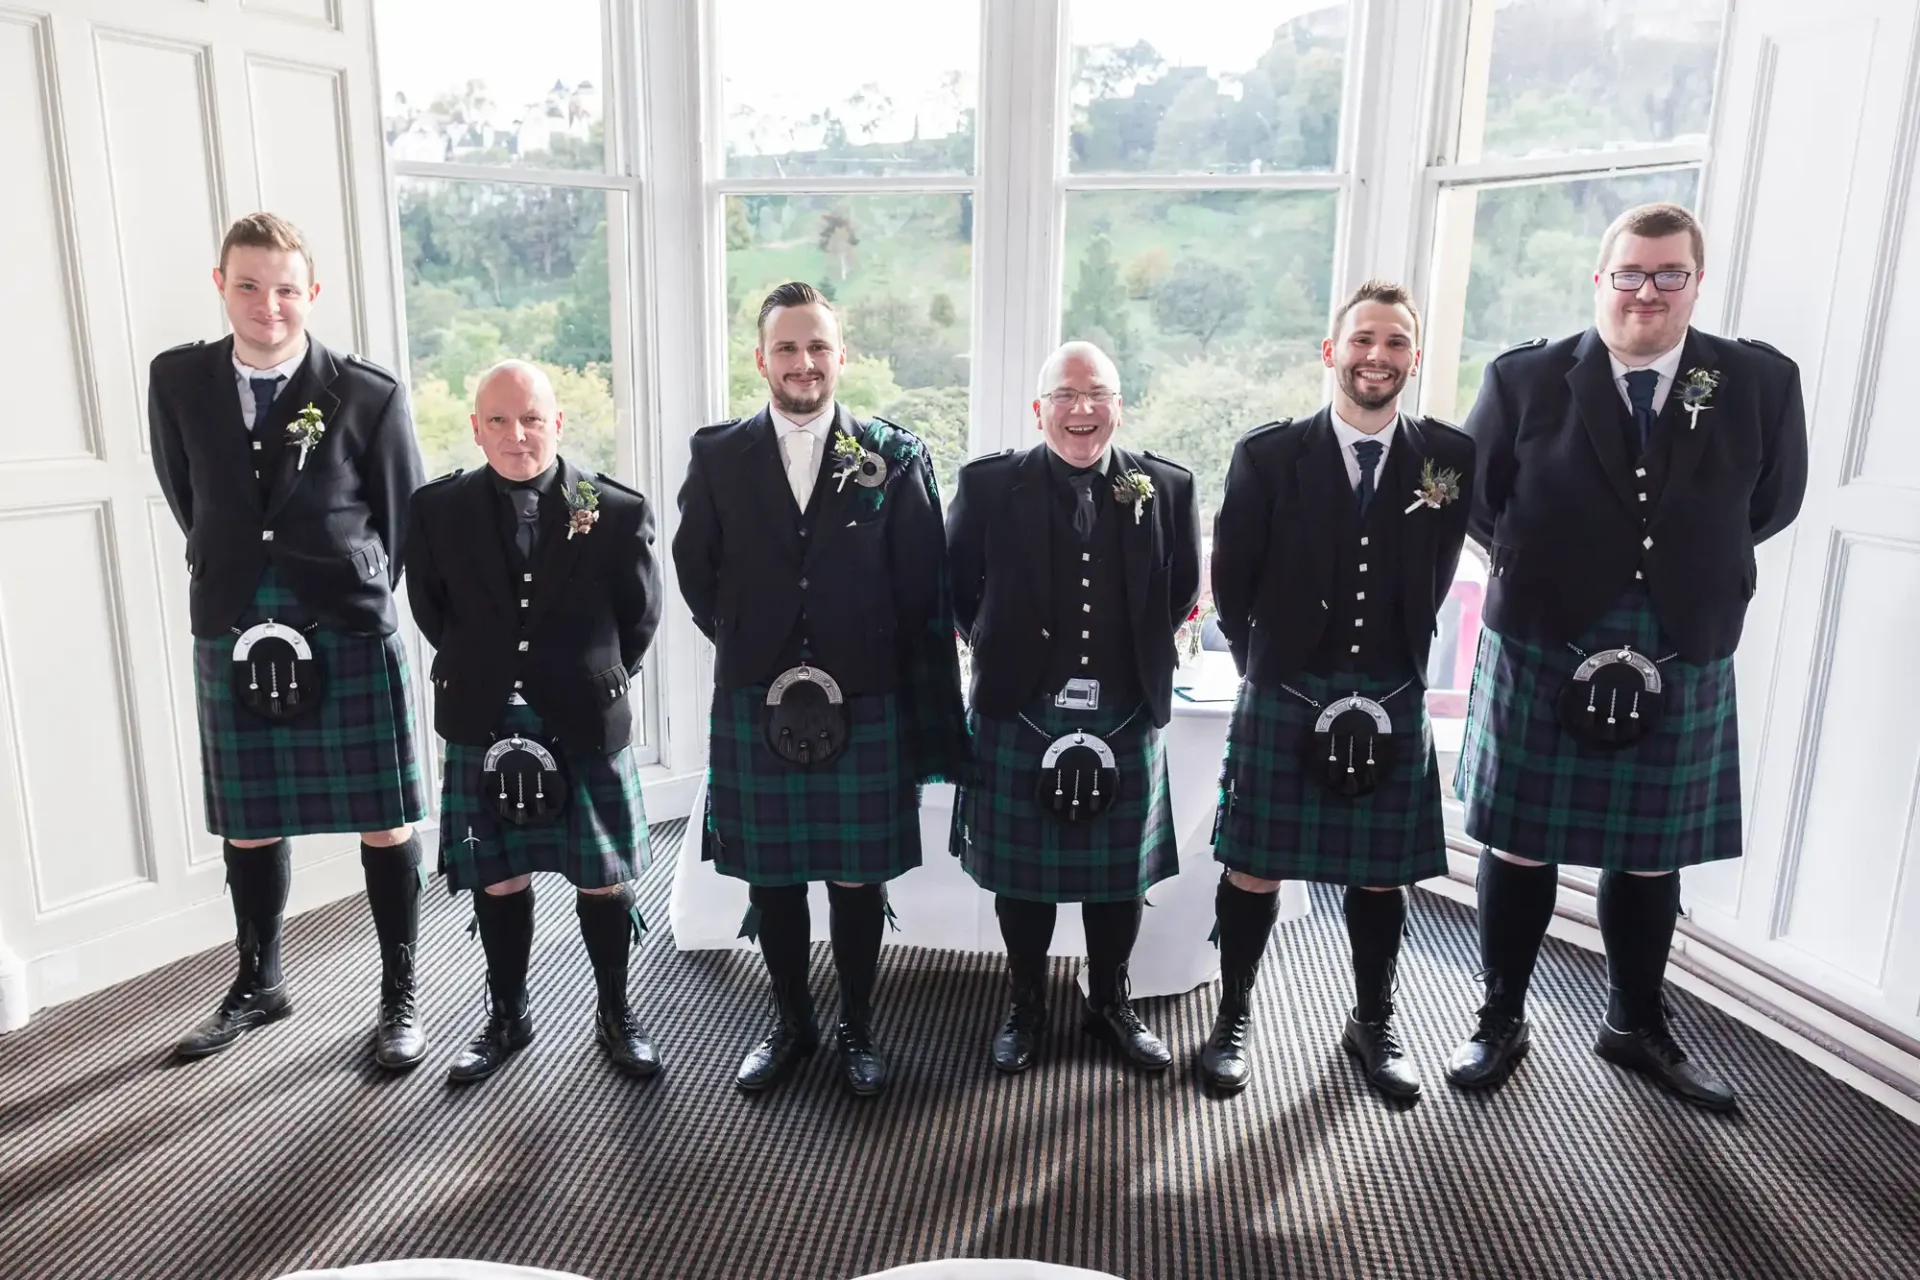 Six men in scottish kilts and formal jackets smiling indoors in front of large windows with a view of greenery.